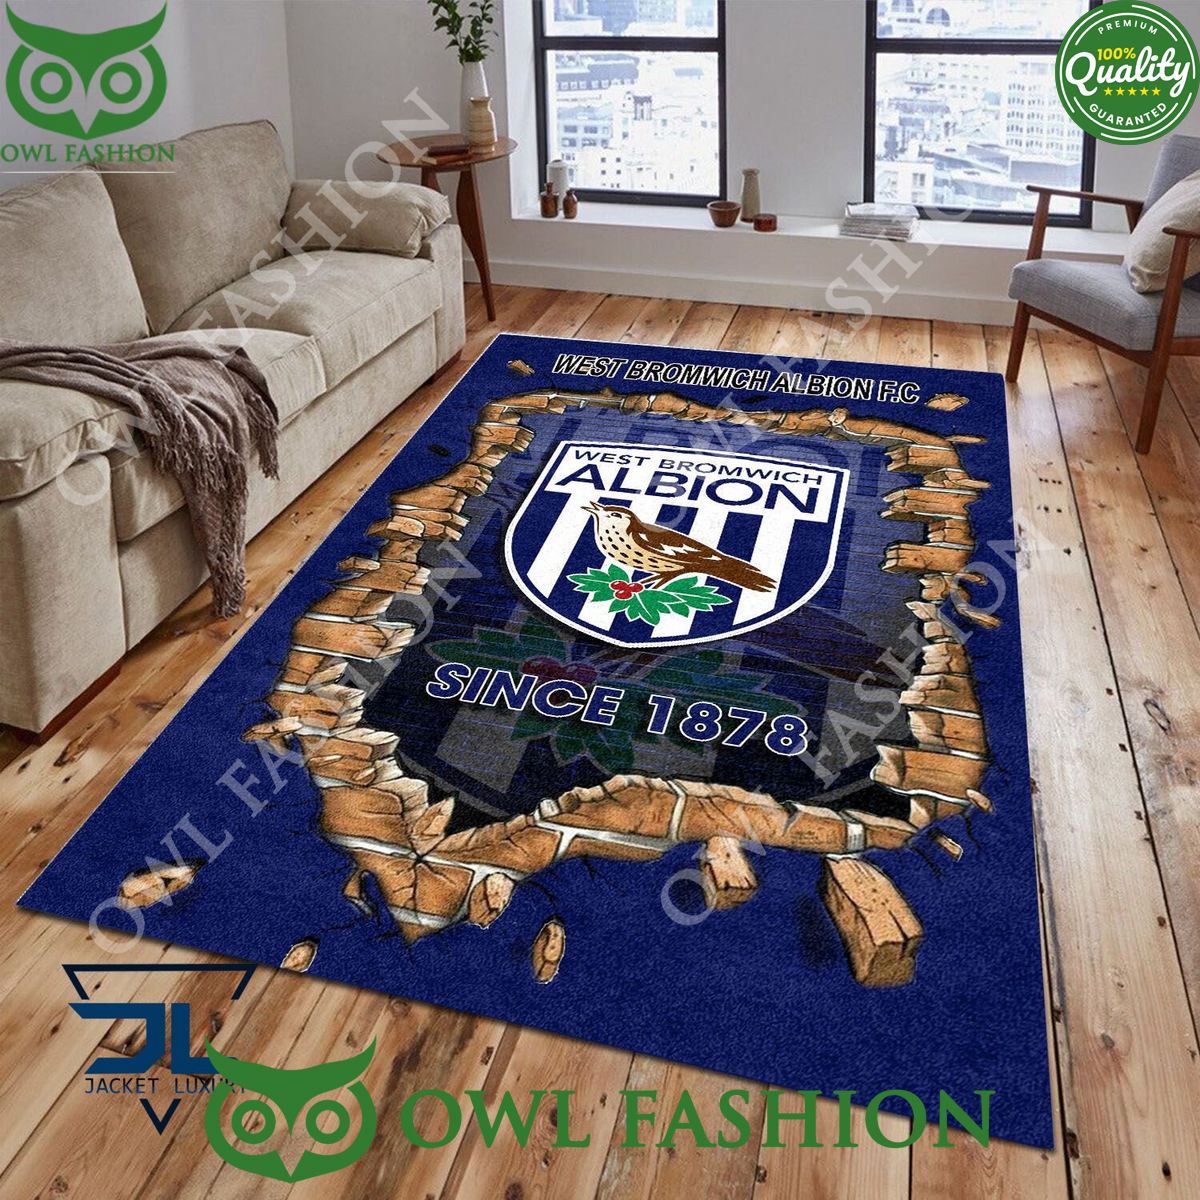 Football West Bromwich Albion F.C 1817 EPL Living Room Rug Carpet